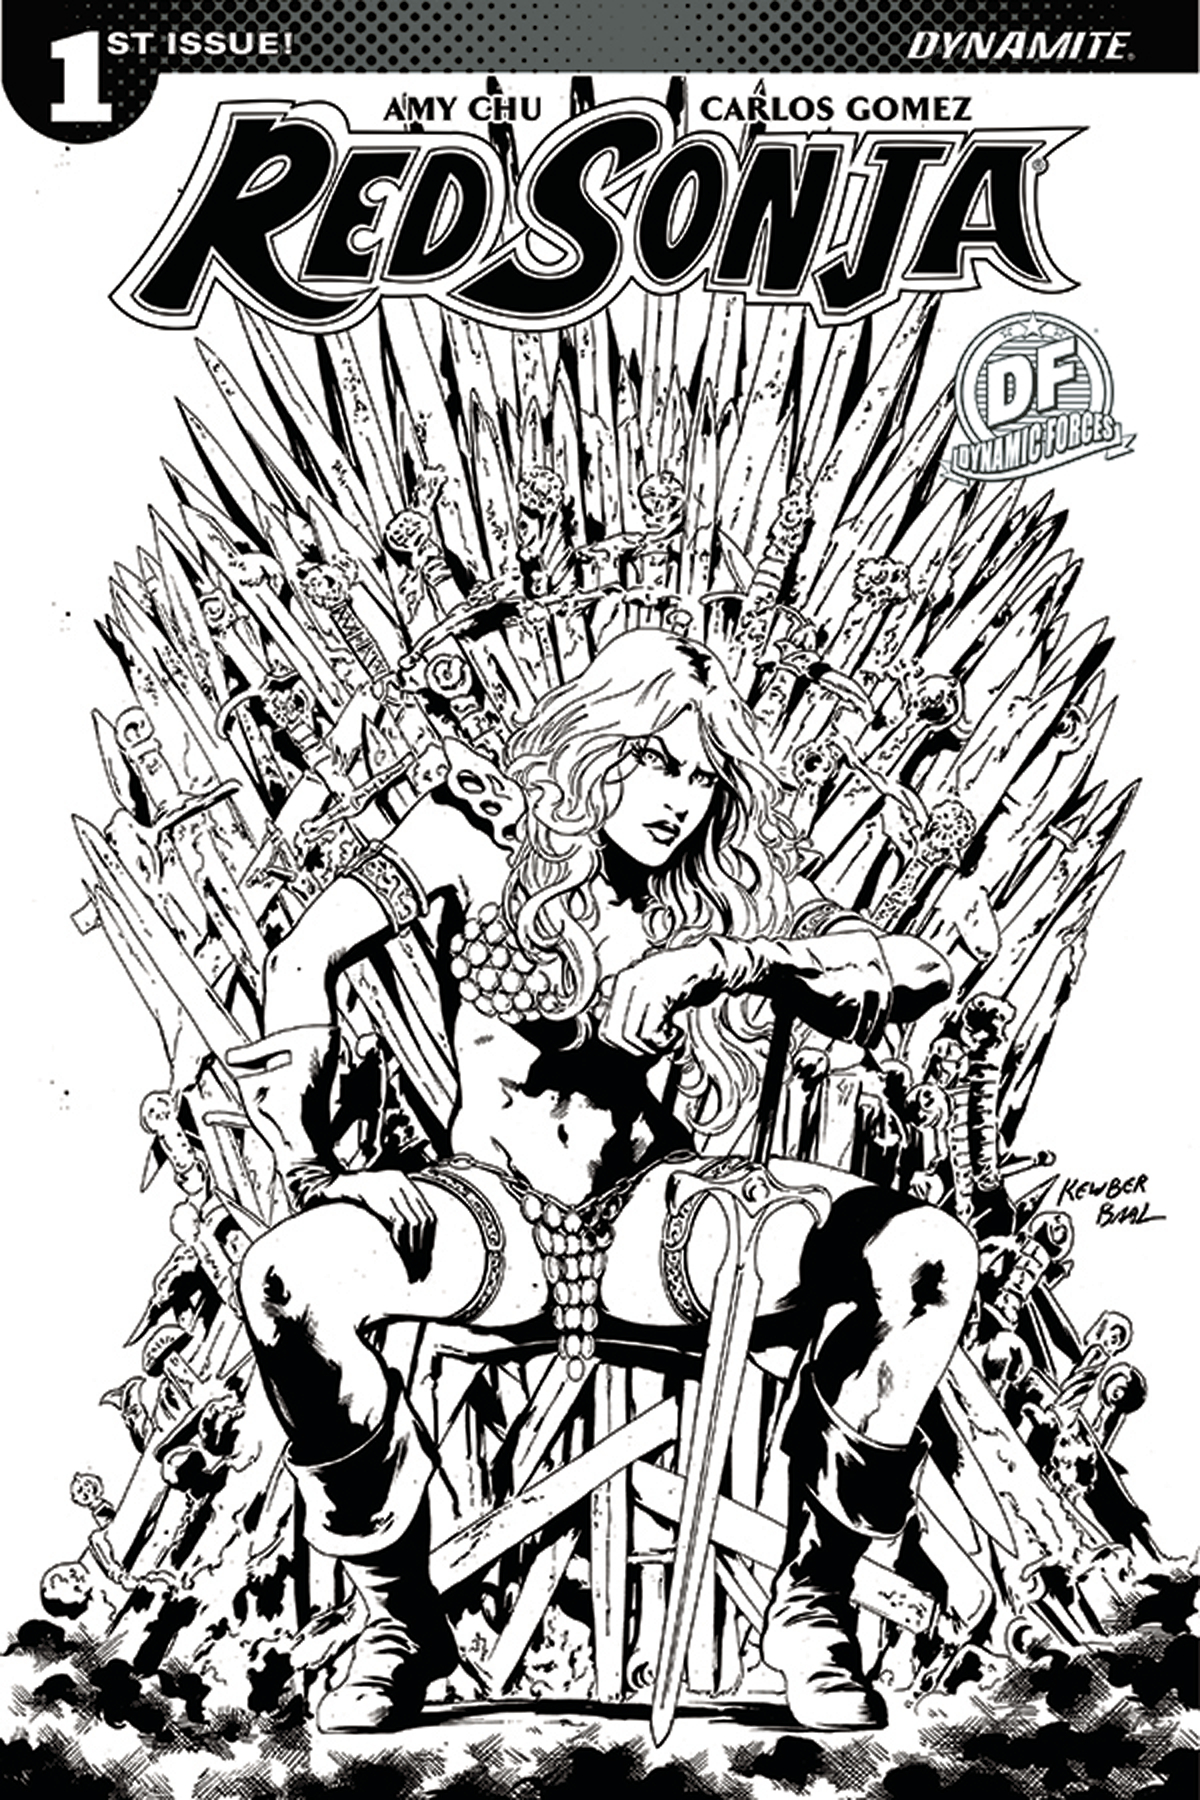 DF RED SONJA #1 DF ON THRONE EXC B&W BAAL